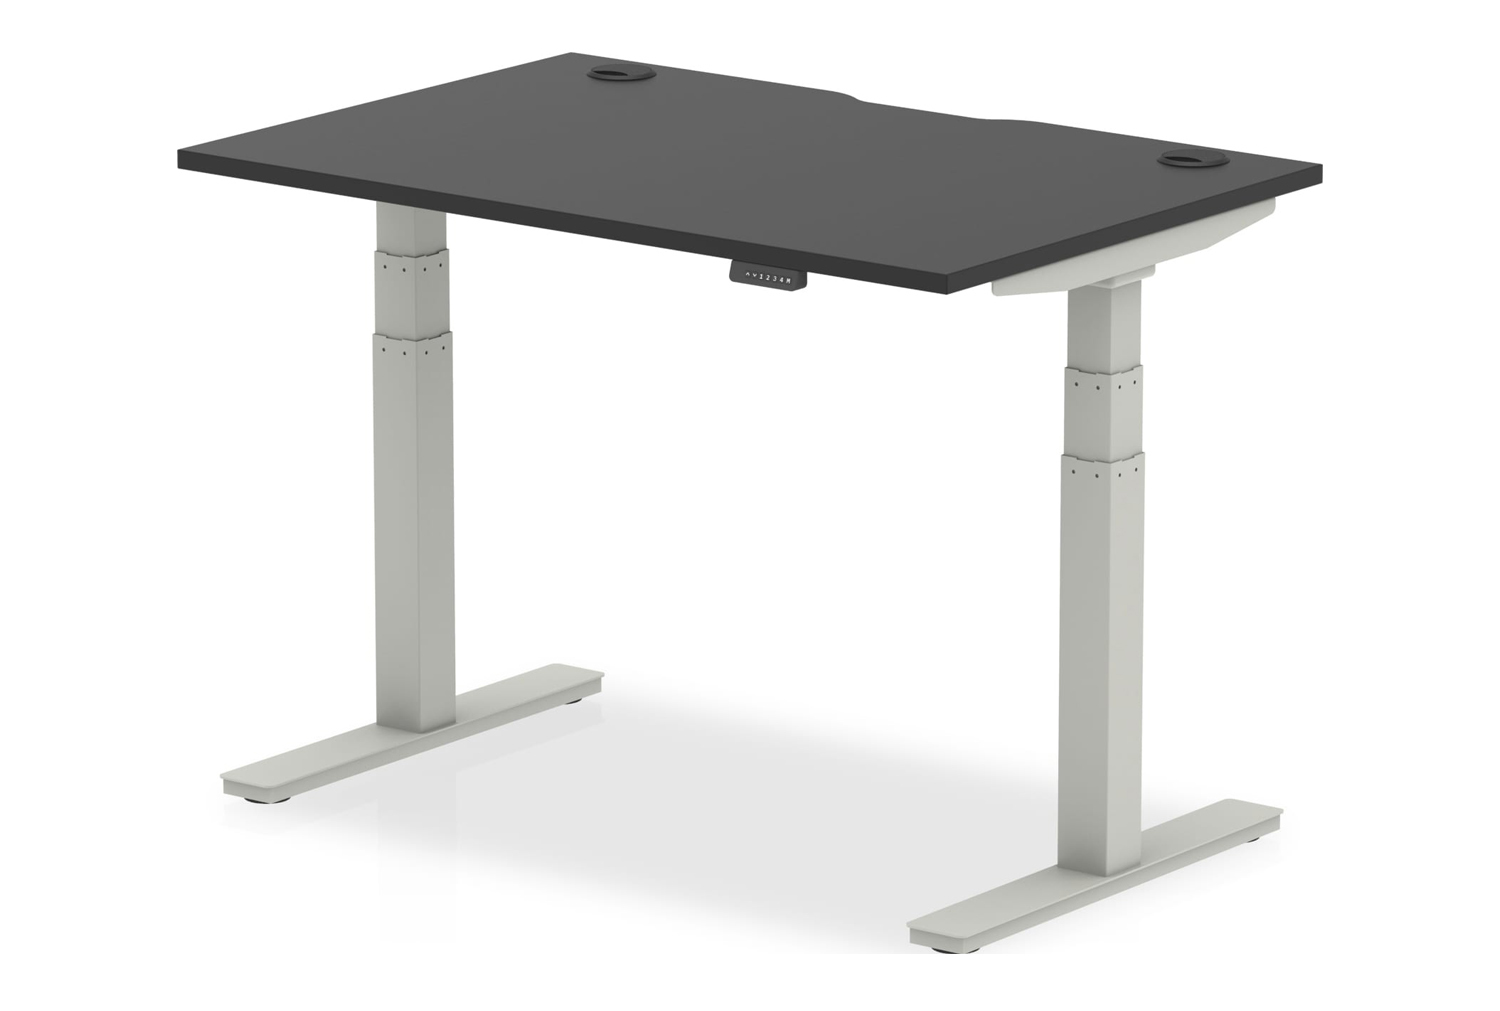 Vitali Nero Sit & Stand Rectangular Office Desk (Silver Legs), 120wx80dx66/130h (cm), Silver, Express Delivery